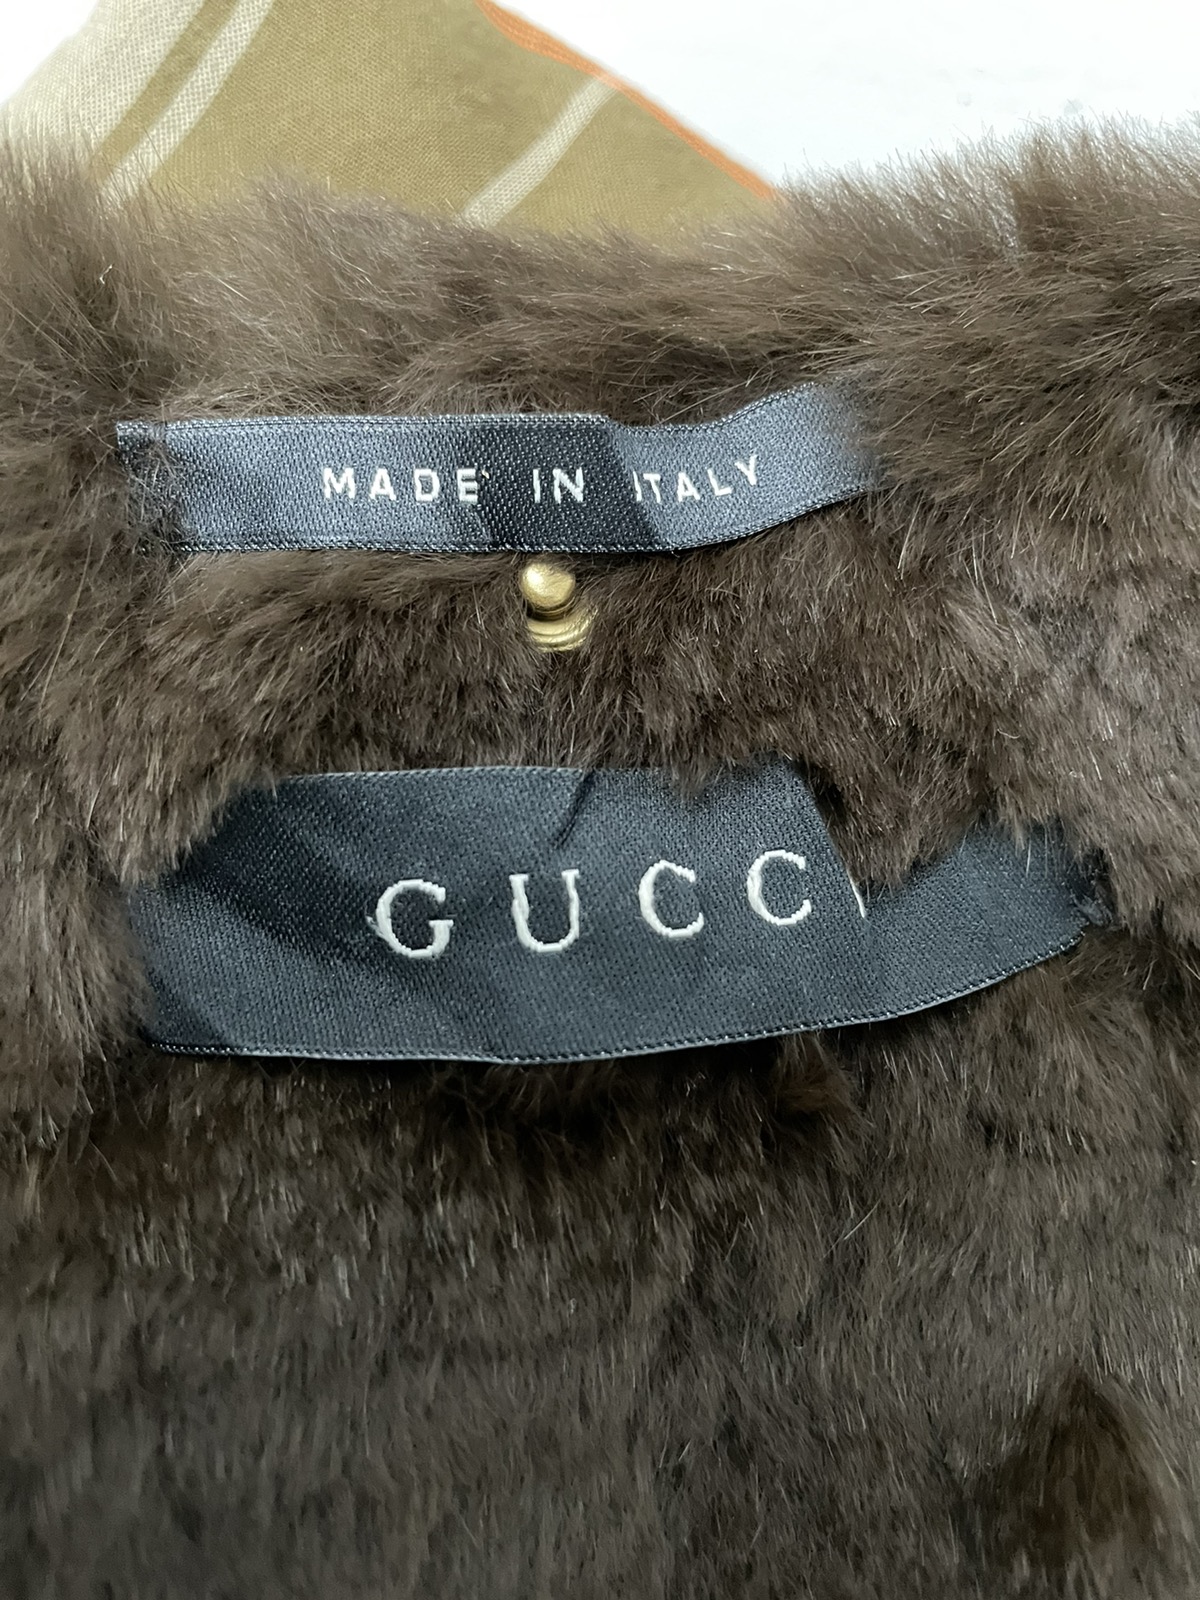 Gucci The Natural Lapin Fur Leather Vest Jackets Size 38 - 12